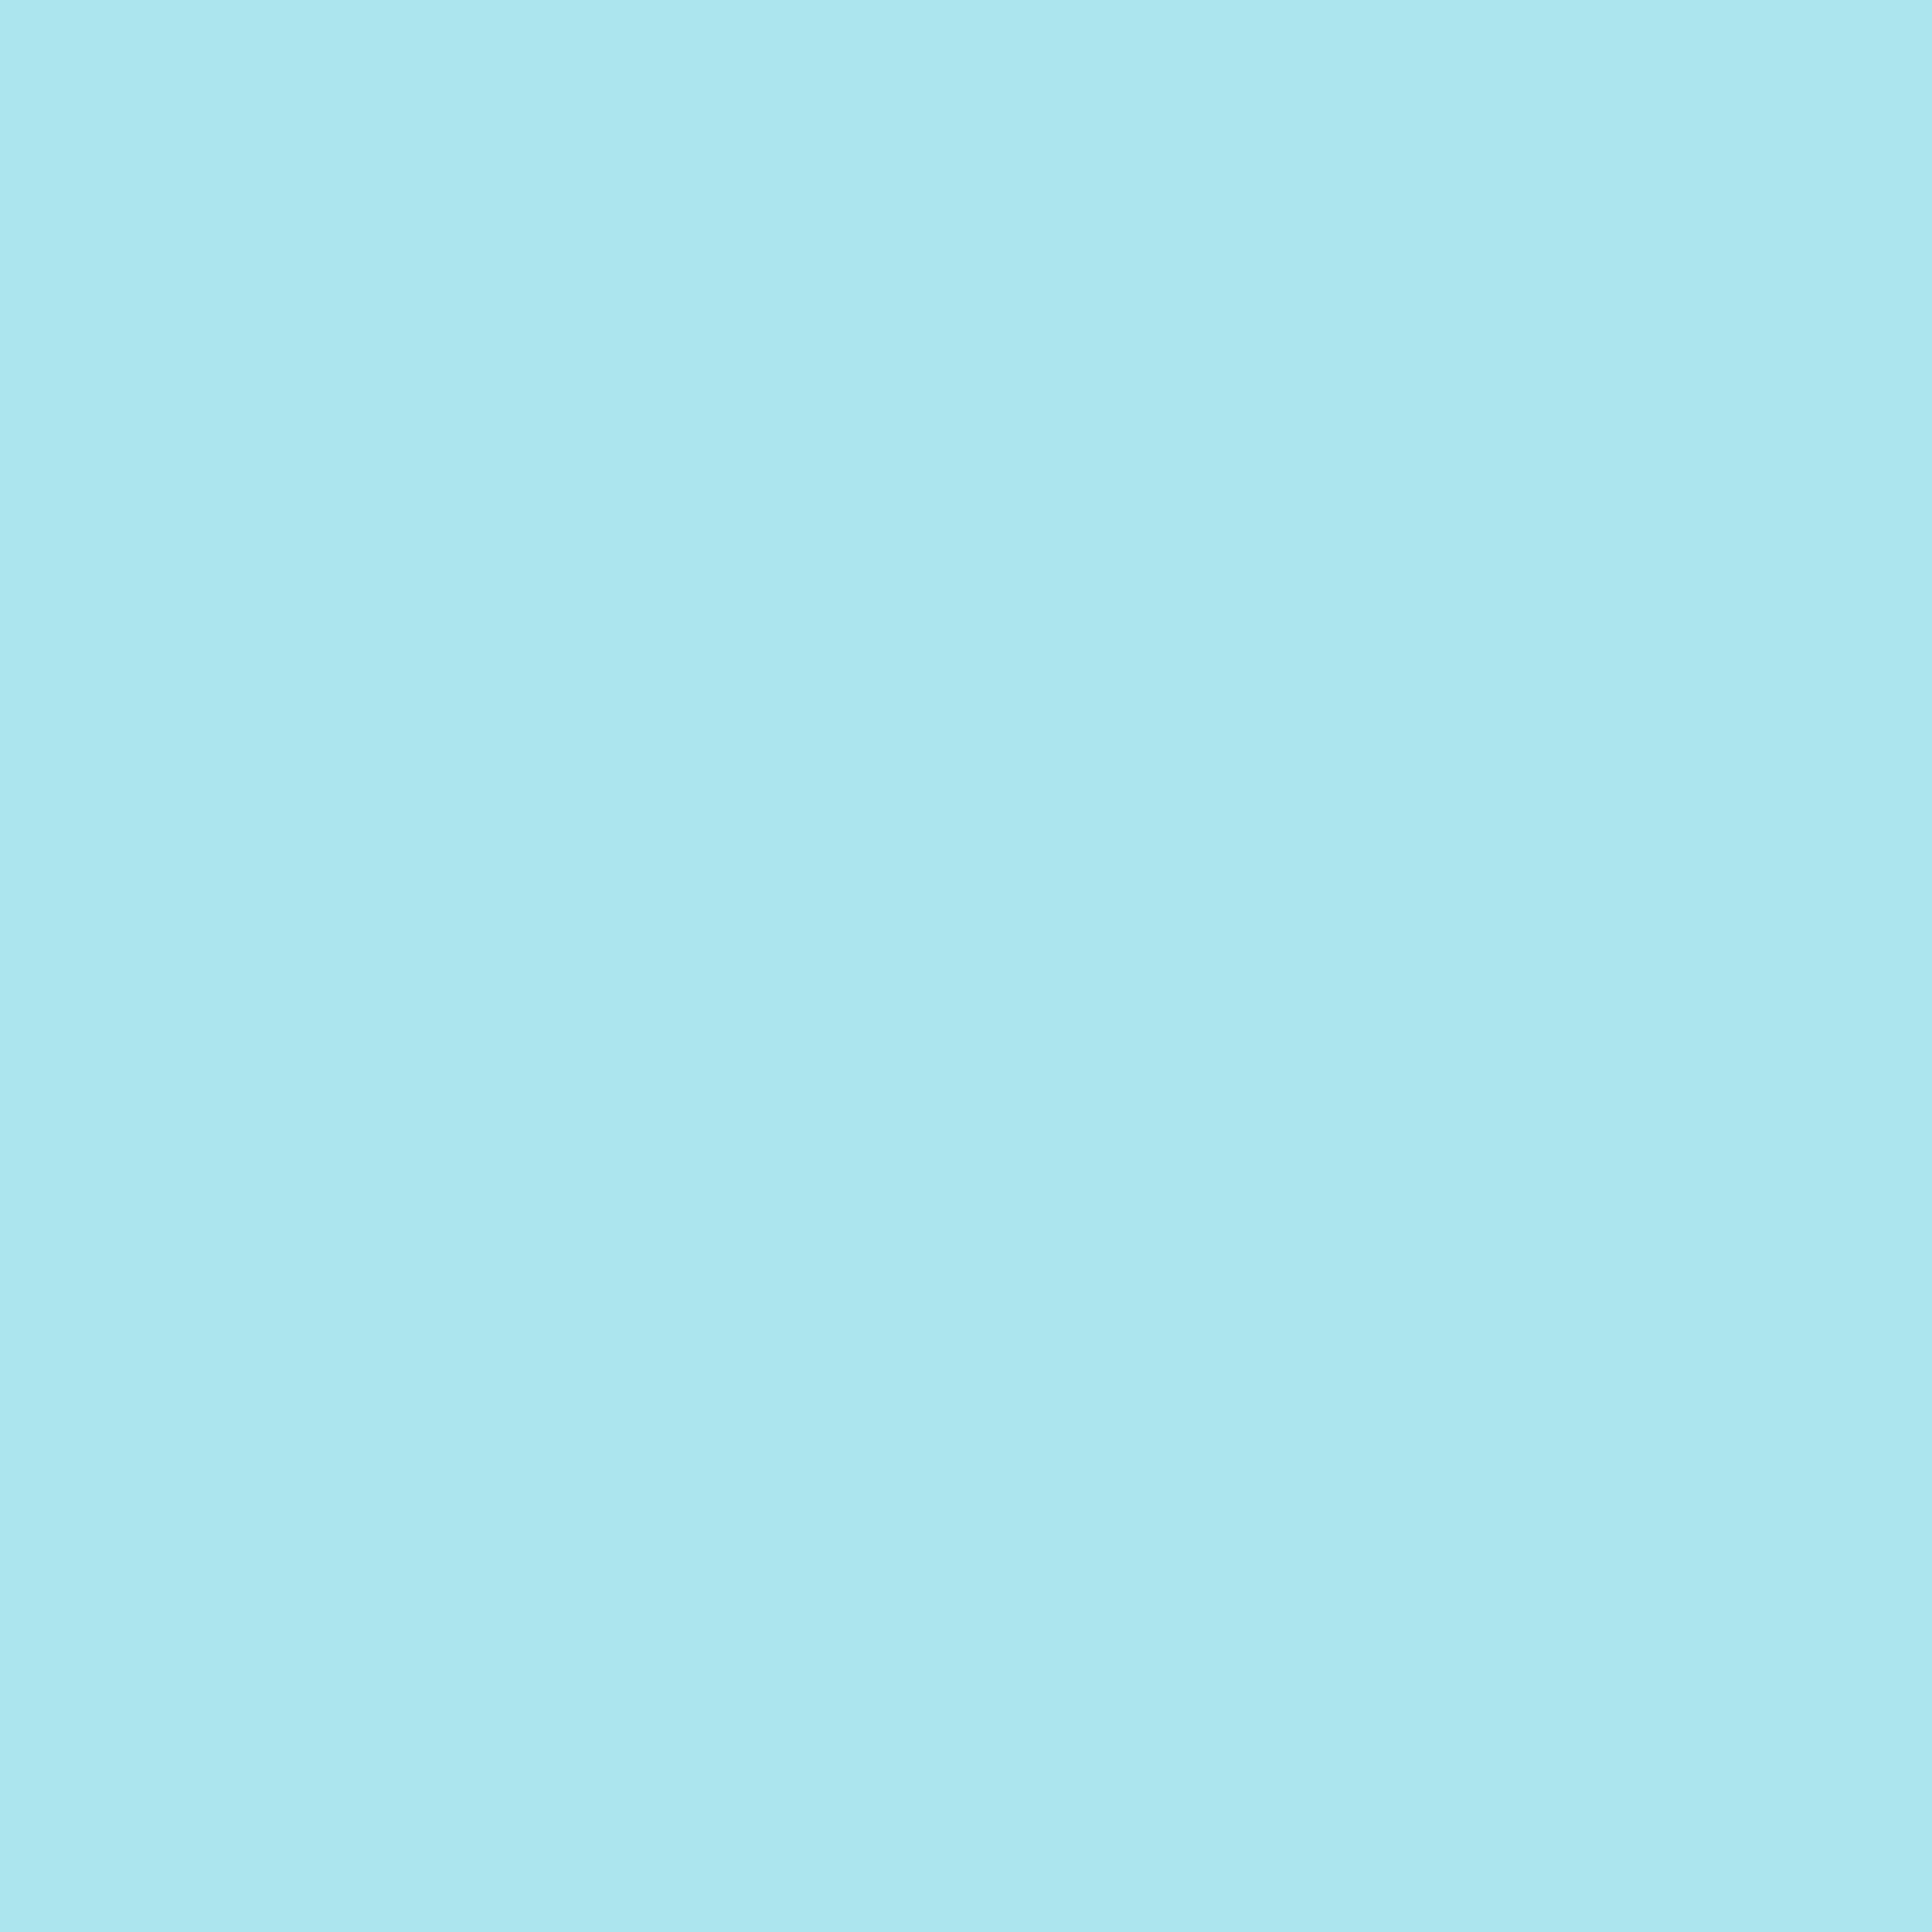 2732x2732 Blizzard Blue Solid Color Background